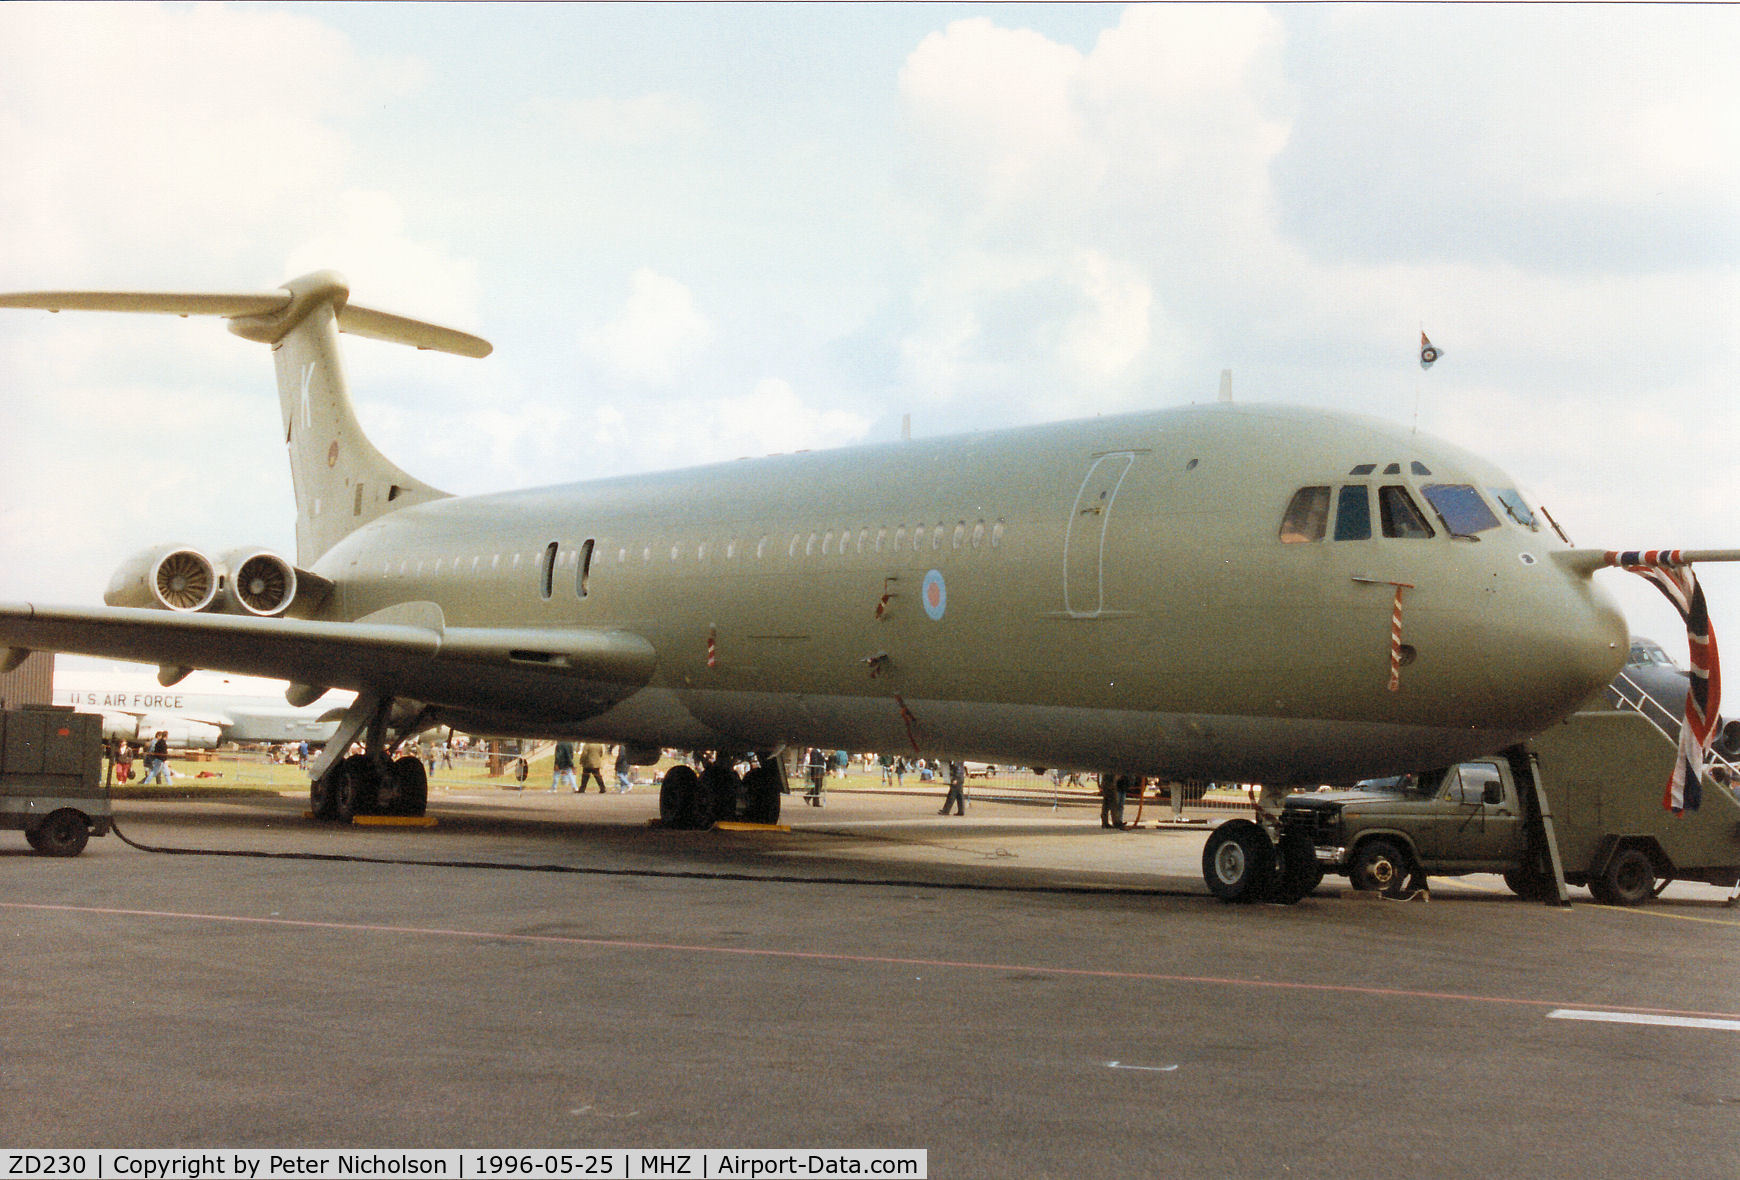 ZD230, 1964 BAC Super VC10 K.4 C/N 851, VC-10 K.4 of RAF Brize Norton's 101 Squadron on display at the 1996 RAF Mildenhall Air Fete.